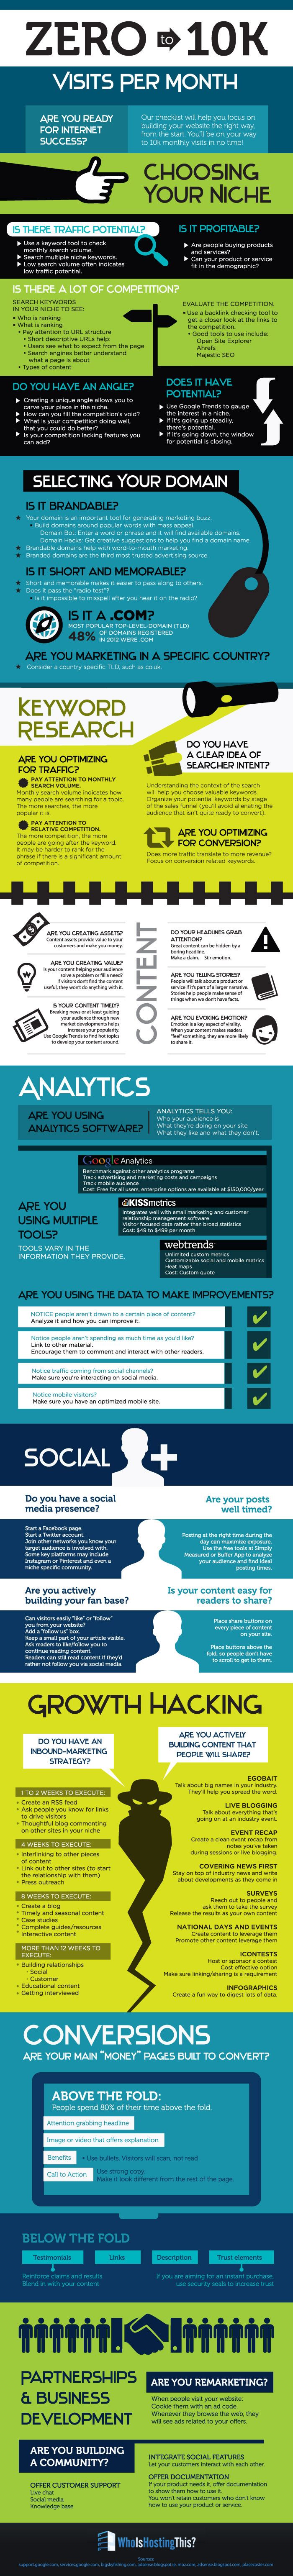 Marketing-Infographic-Are-you-curious-how-web-gurus-driving-thousands-of-visits-to-their-blogs-and Marketing Infographic : Are you curious how web gurus driving thousands of #visits to their #blogs and #...